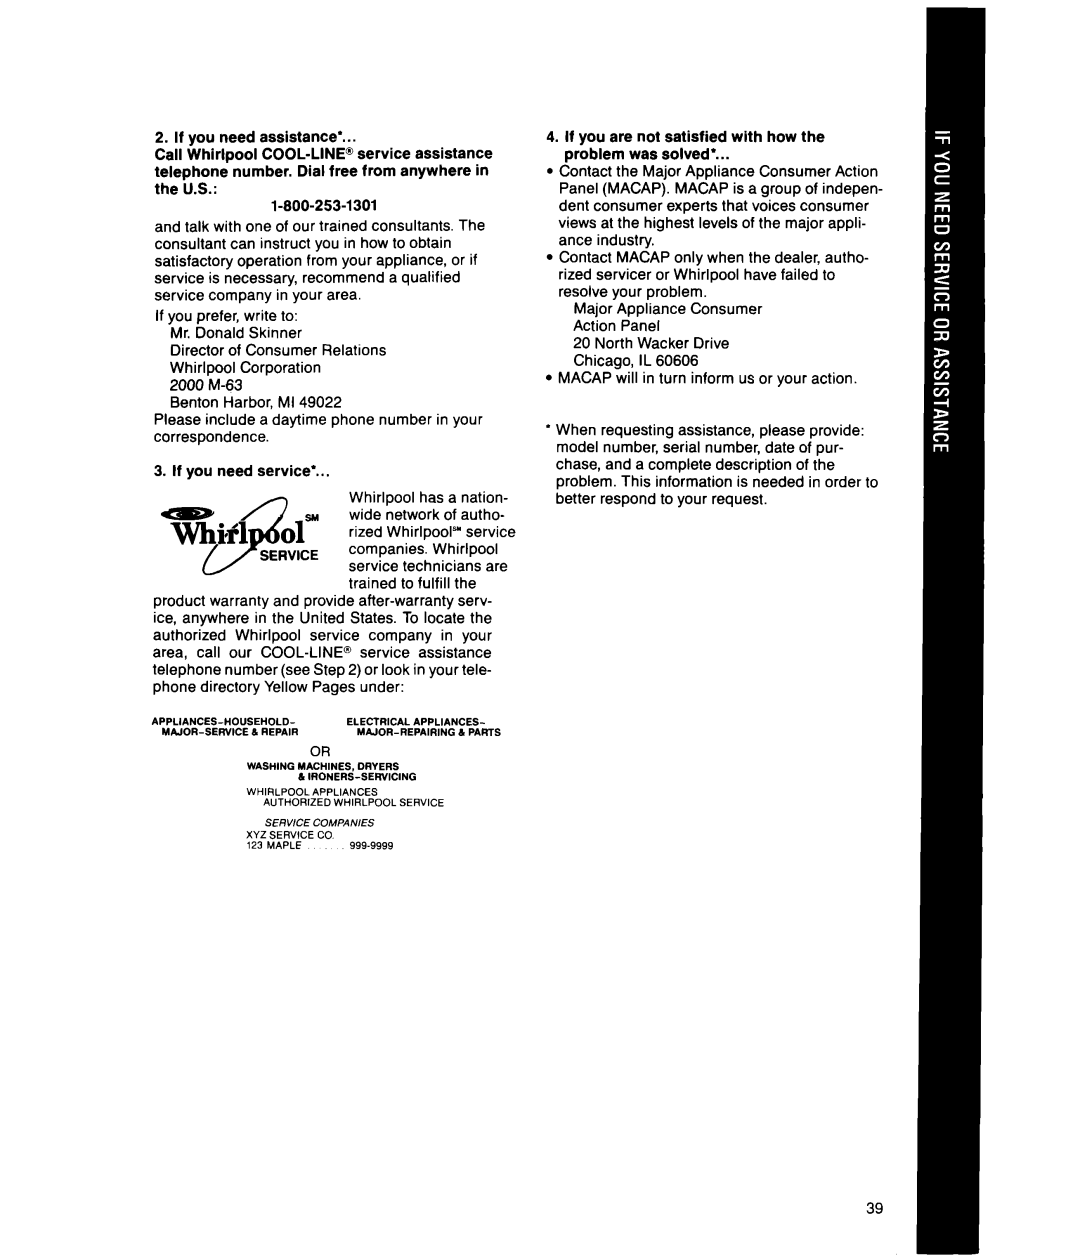 Whirlpool MT2150XW manual If you need assistance’ 